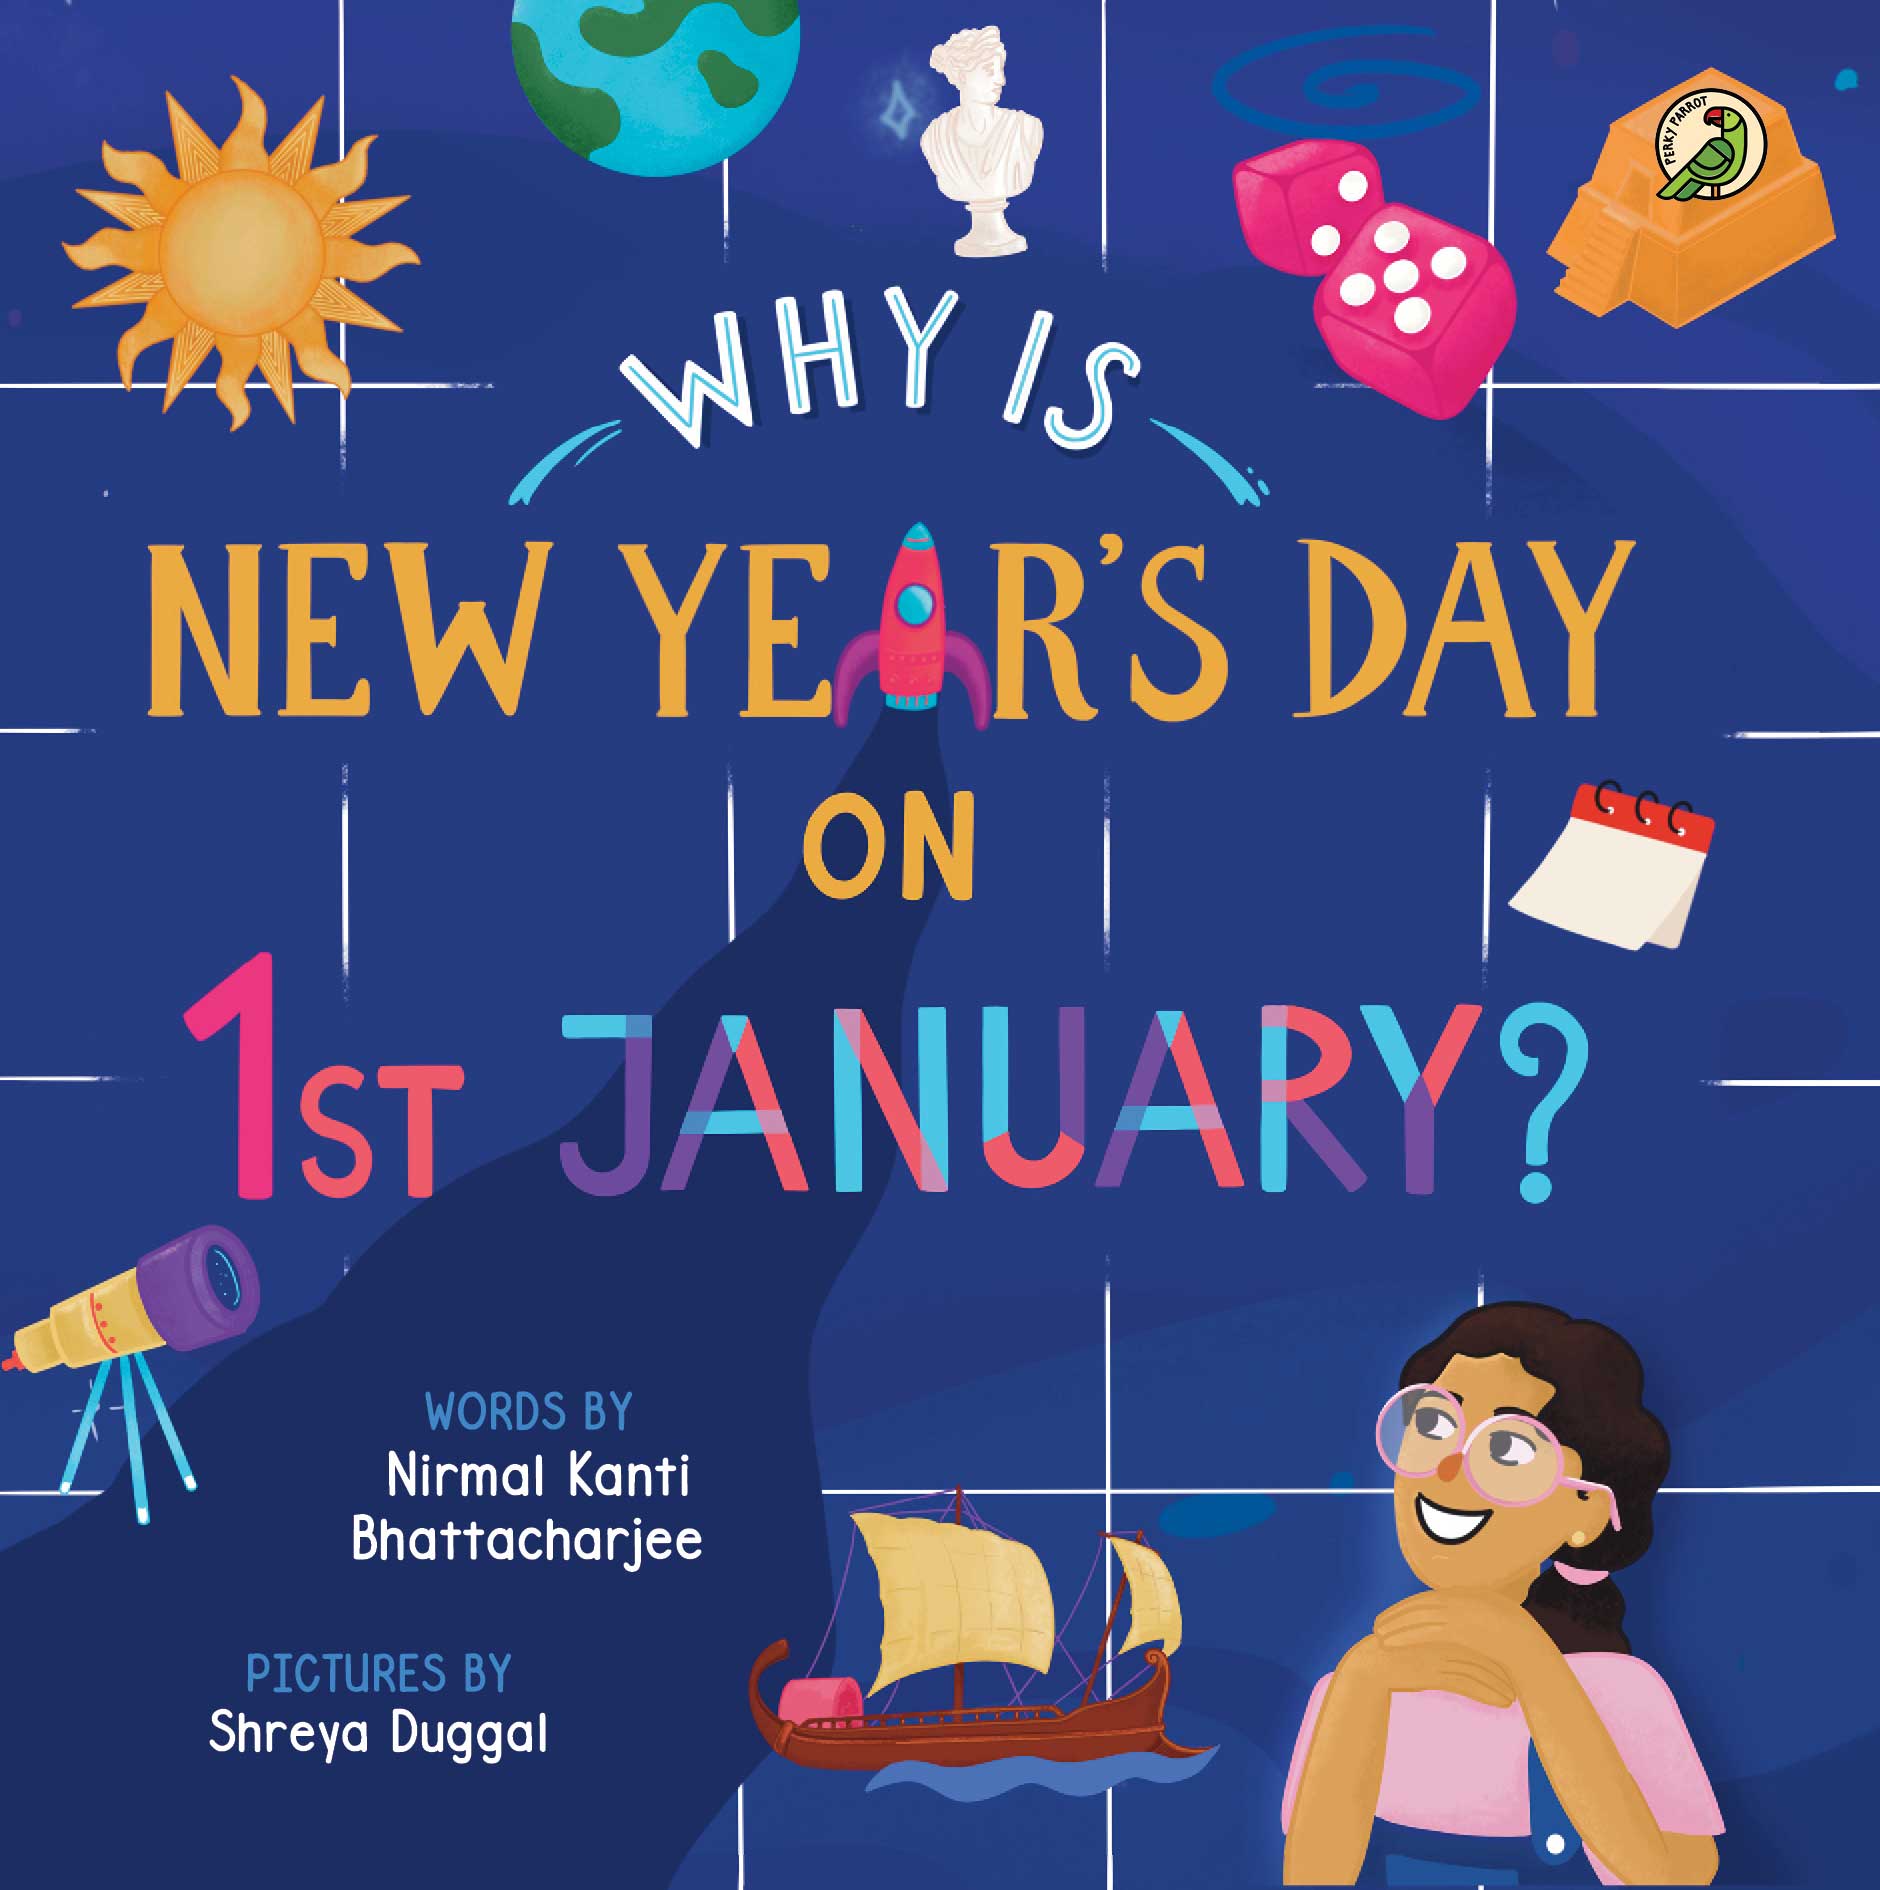 Why is New Year's Day on 1st January? Books